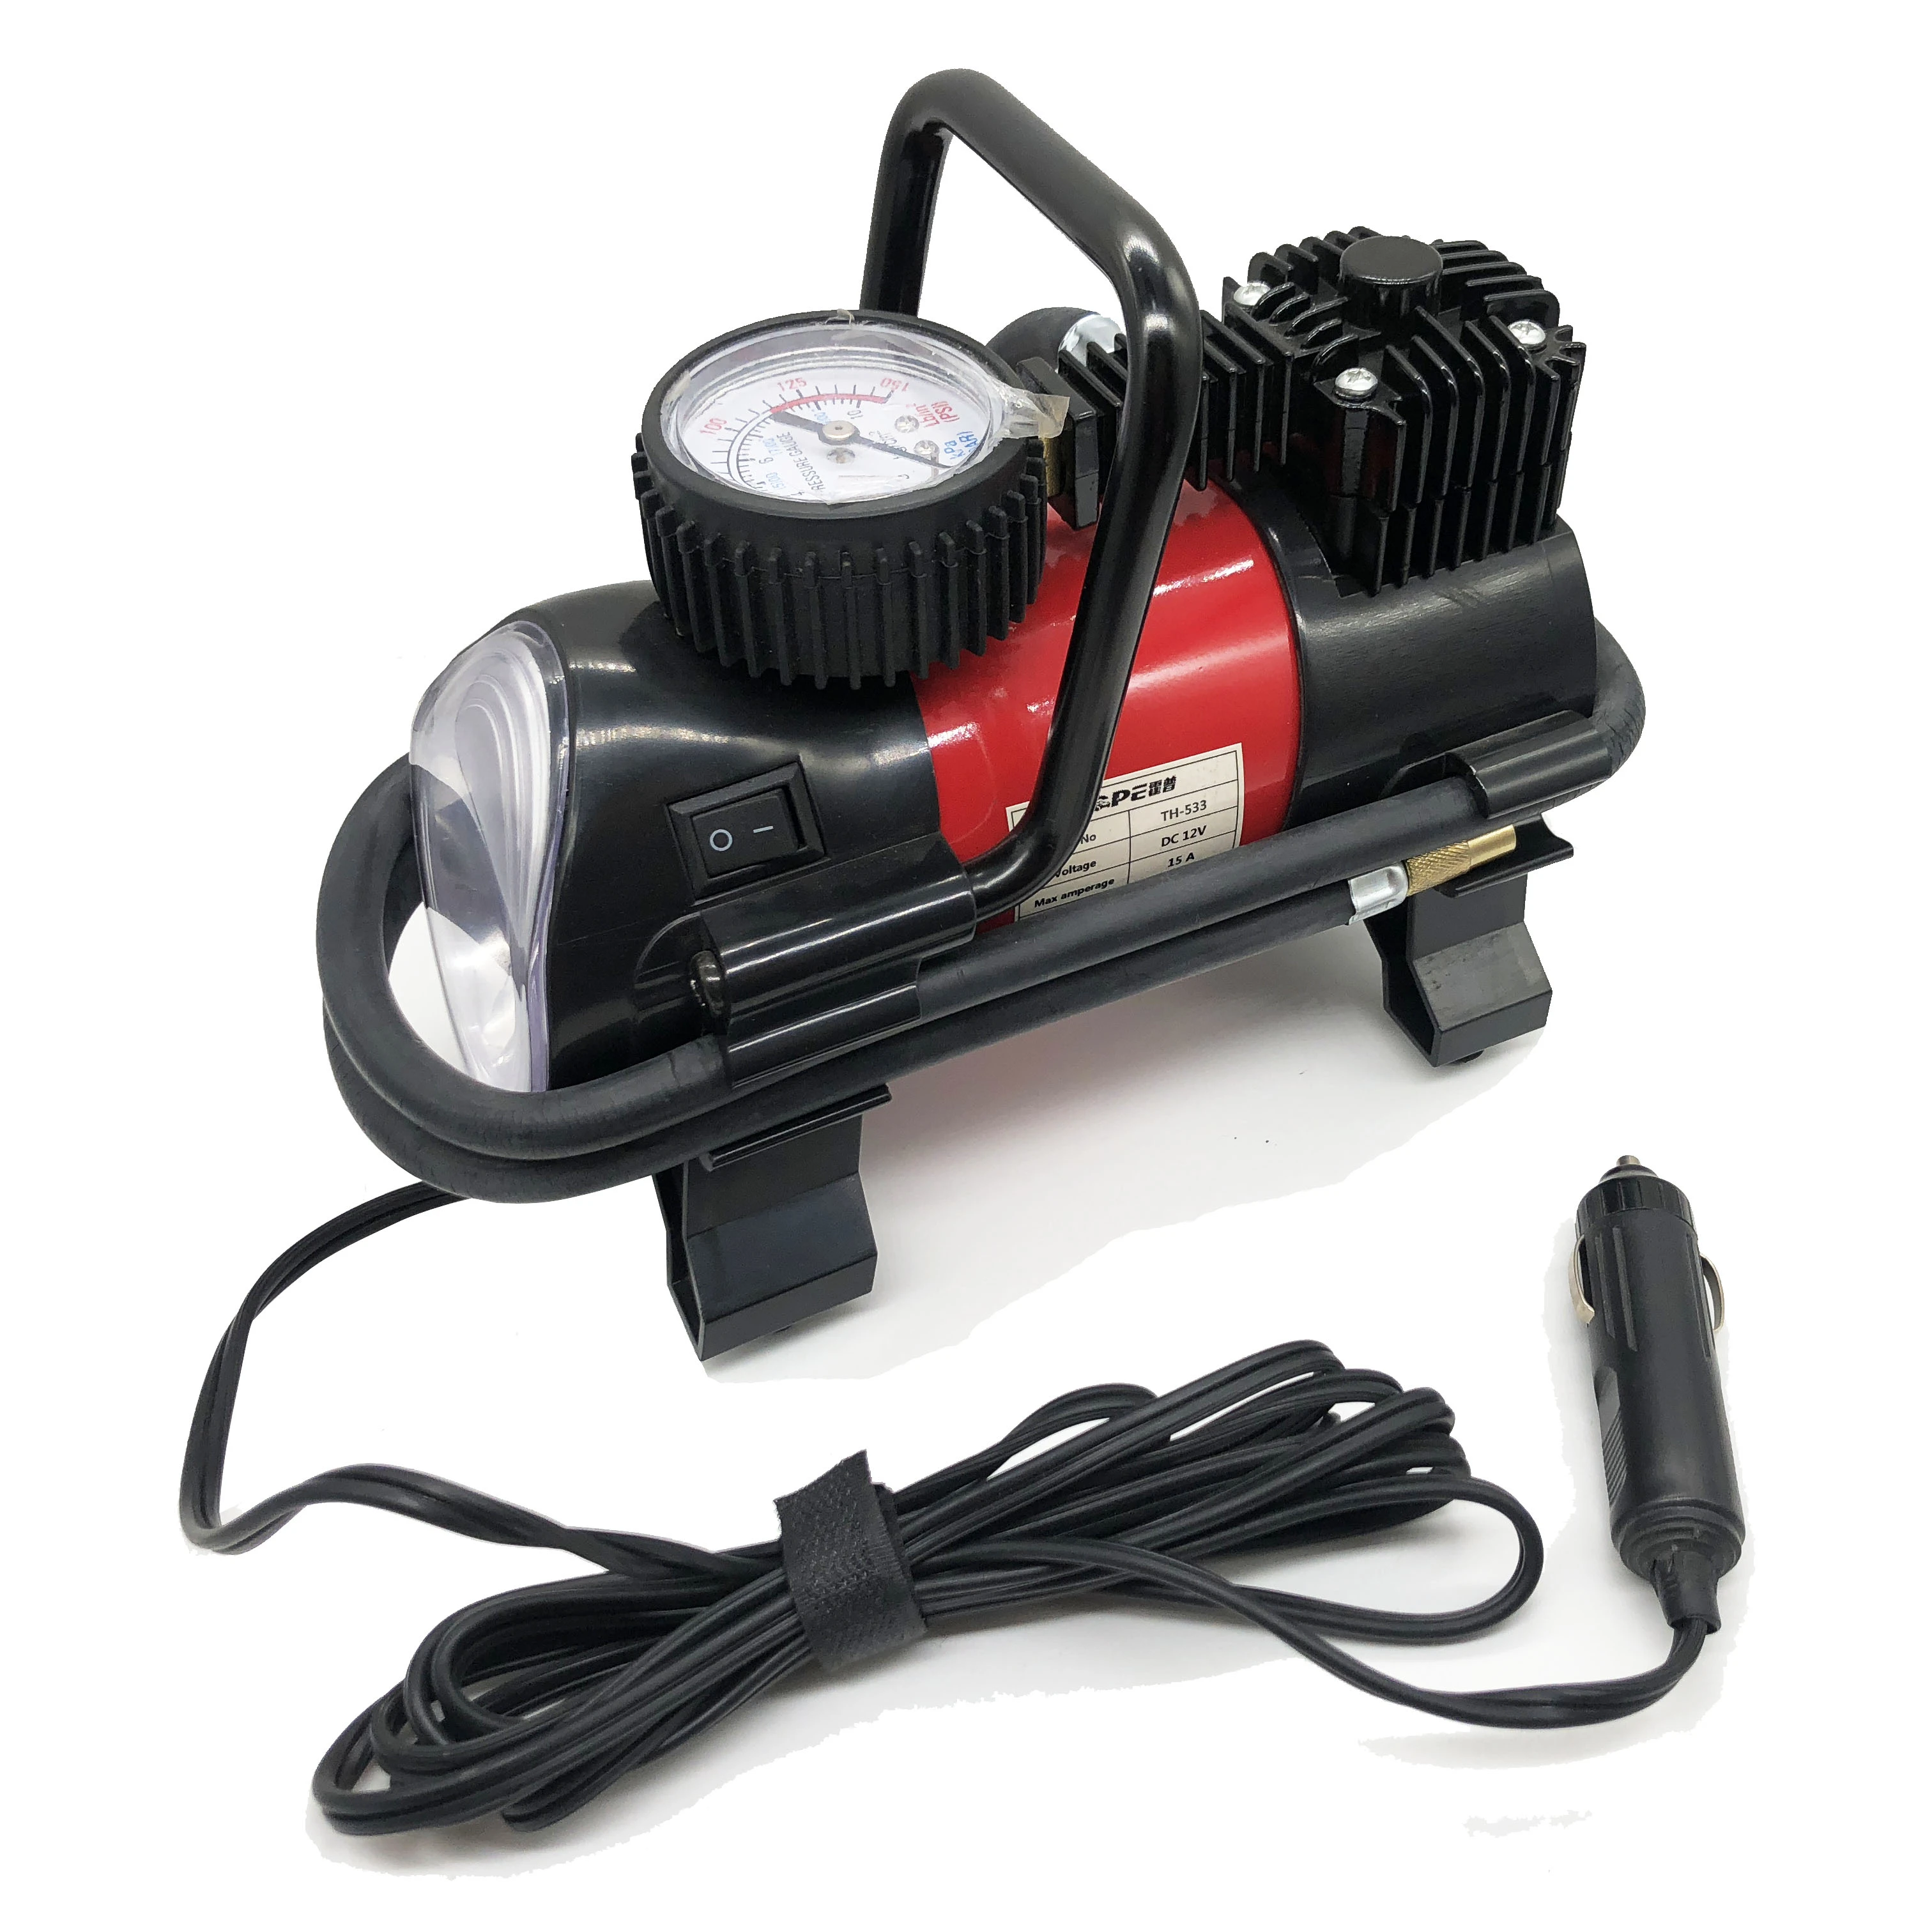 Double cylinder heavy duty DC 12v car inflate pump for tyre air compressor auto metal tire inflator with led light